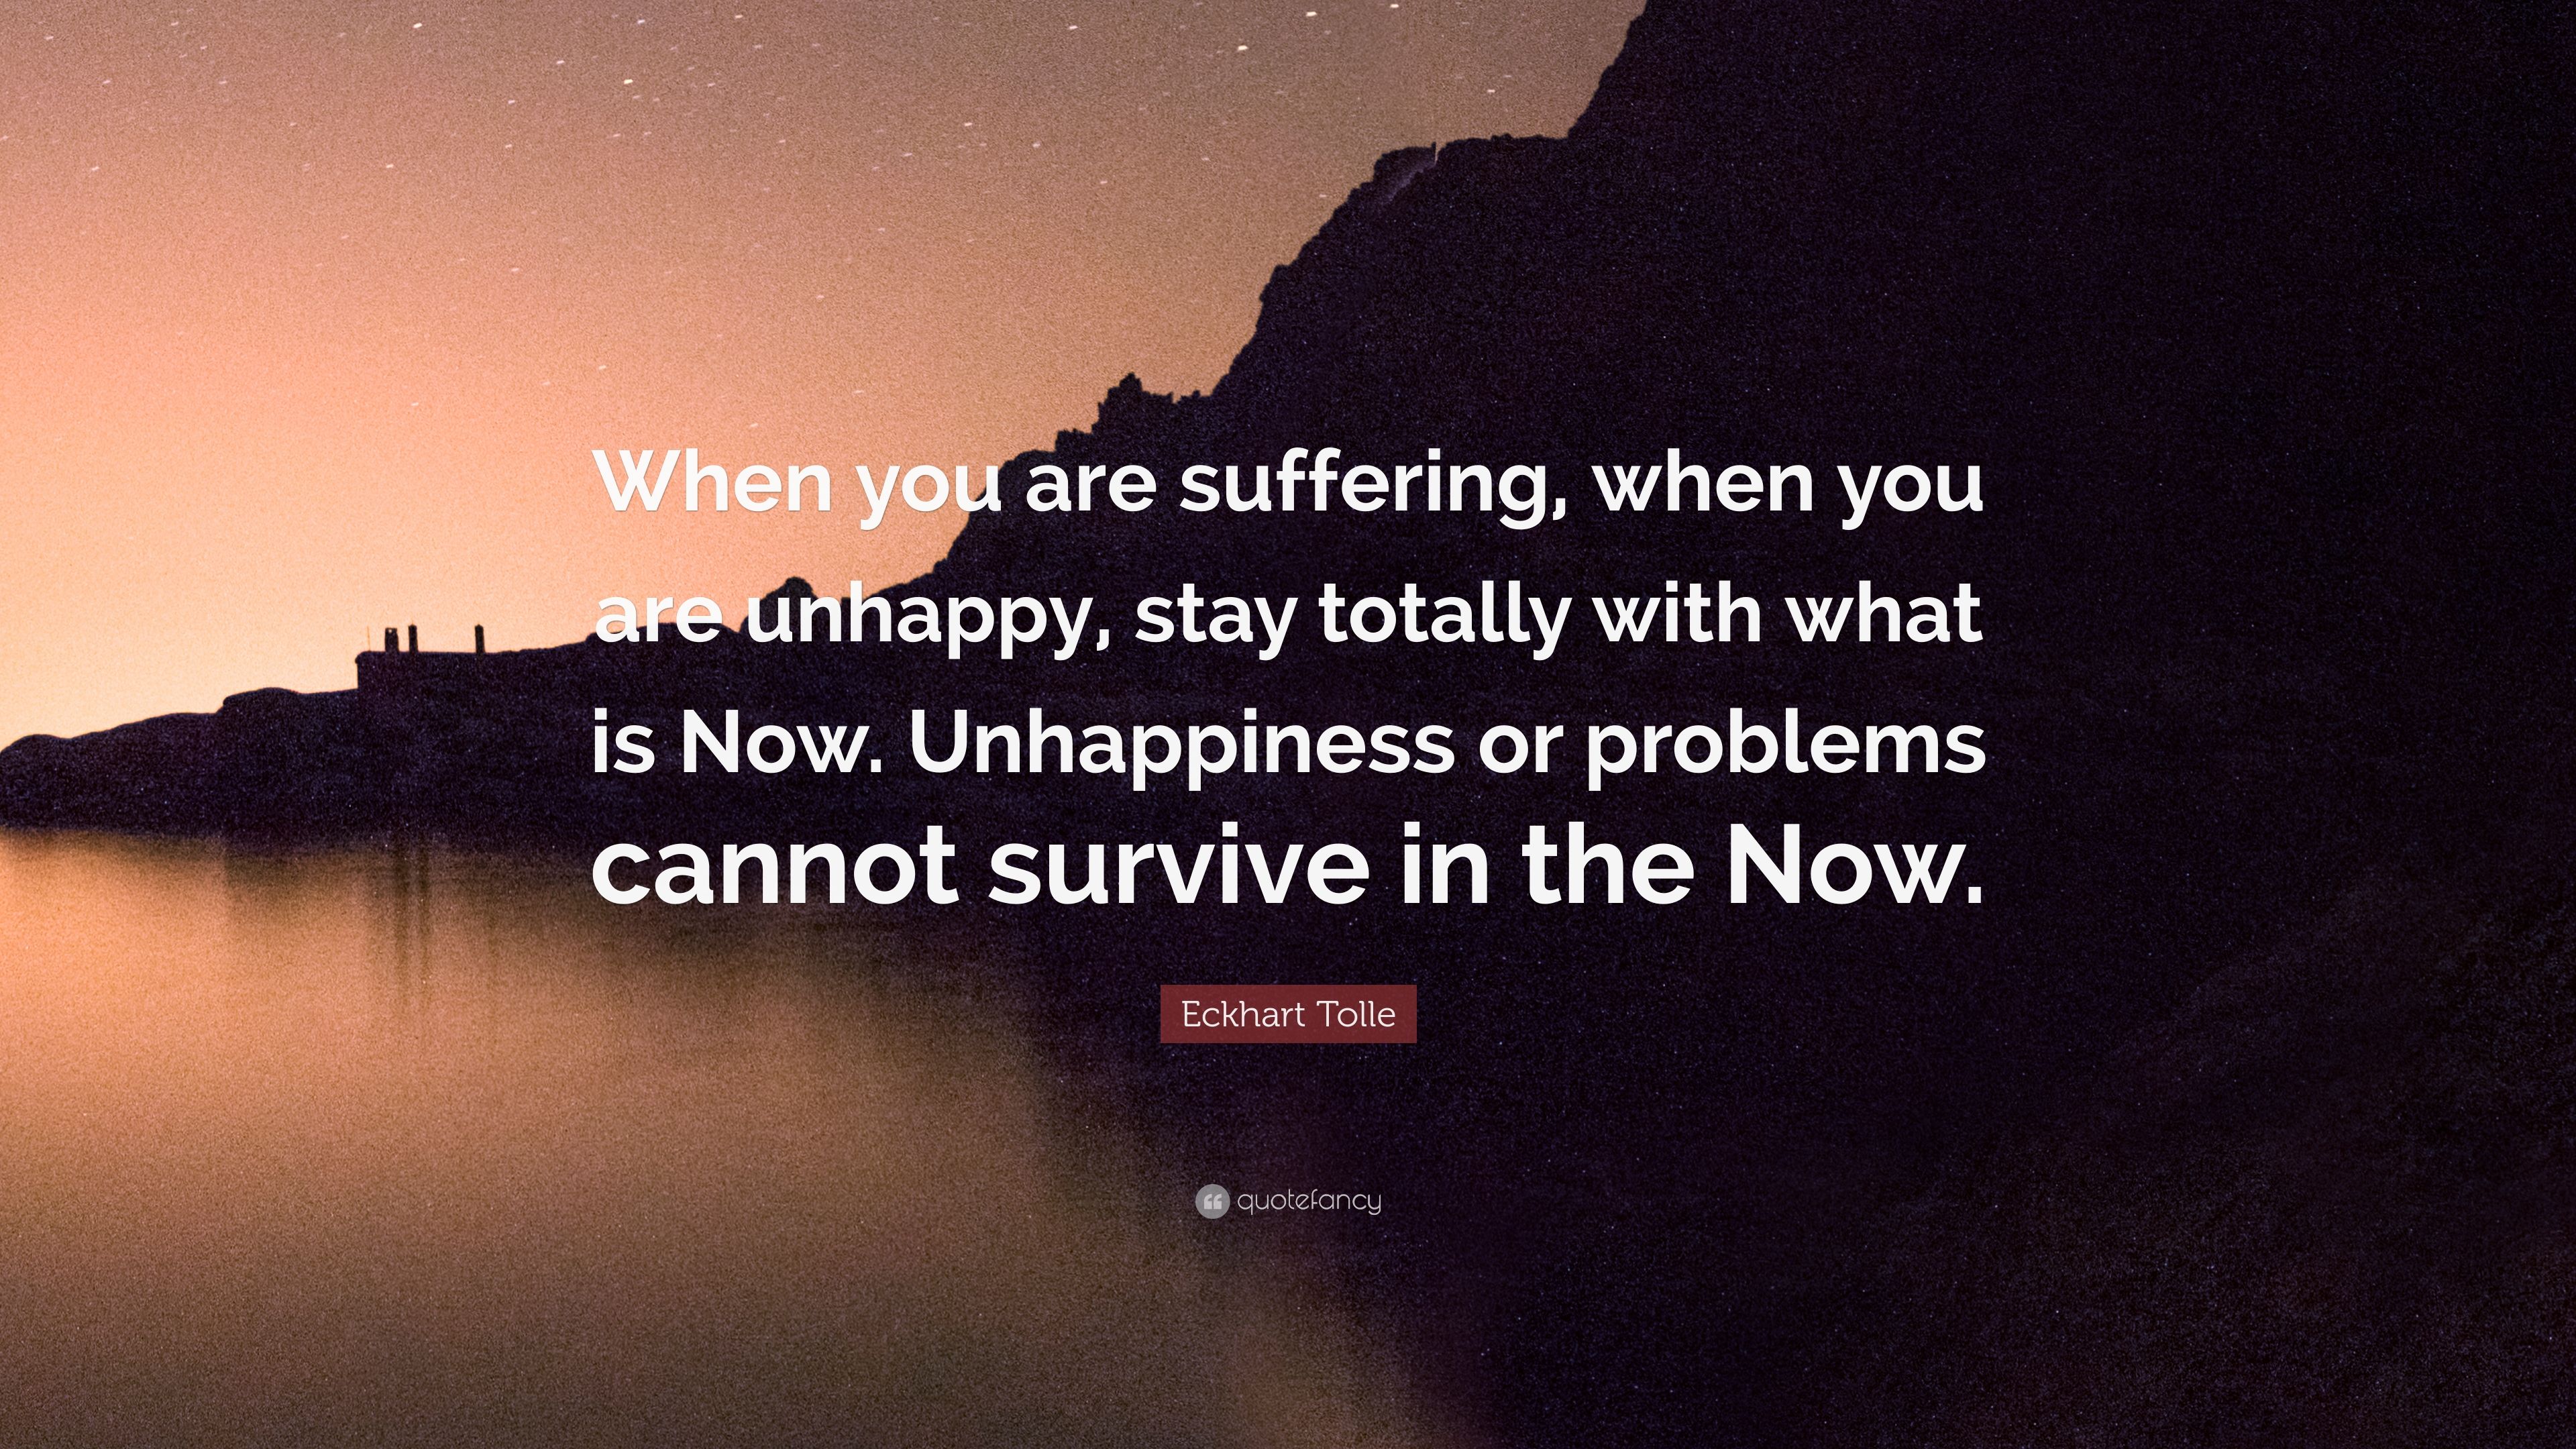 eckhart tolle quotes about suffering